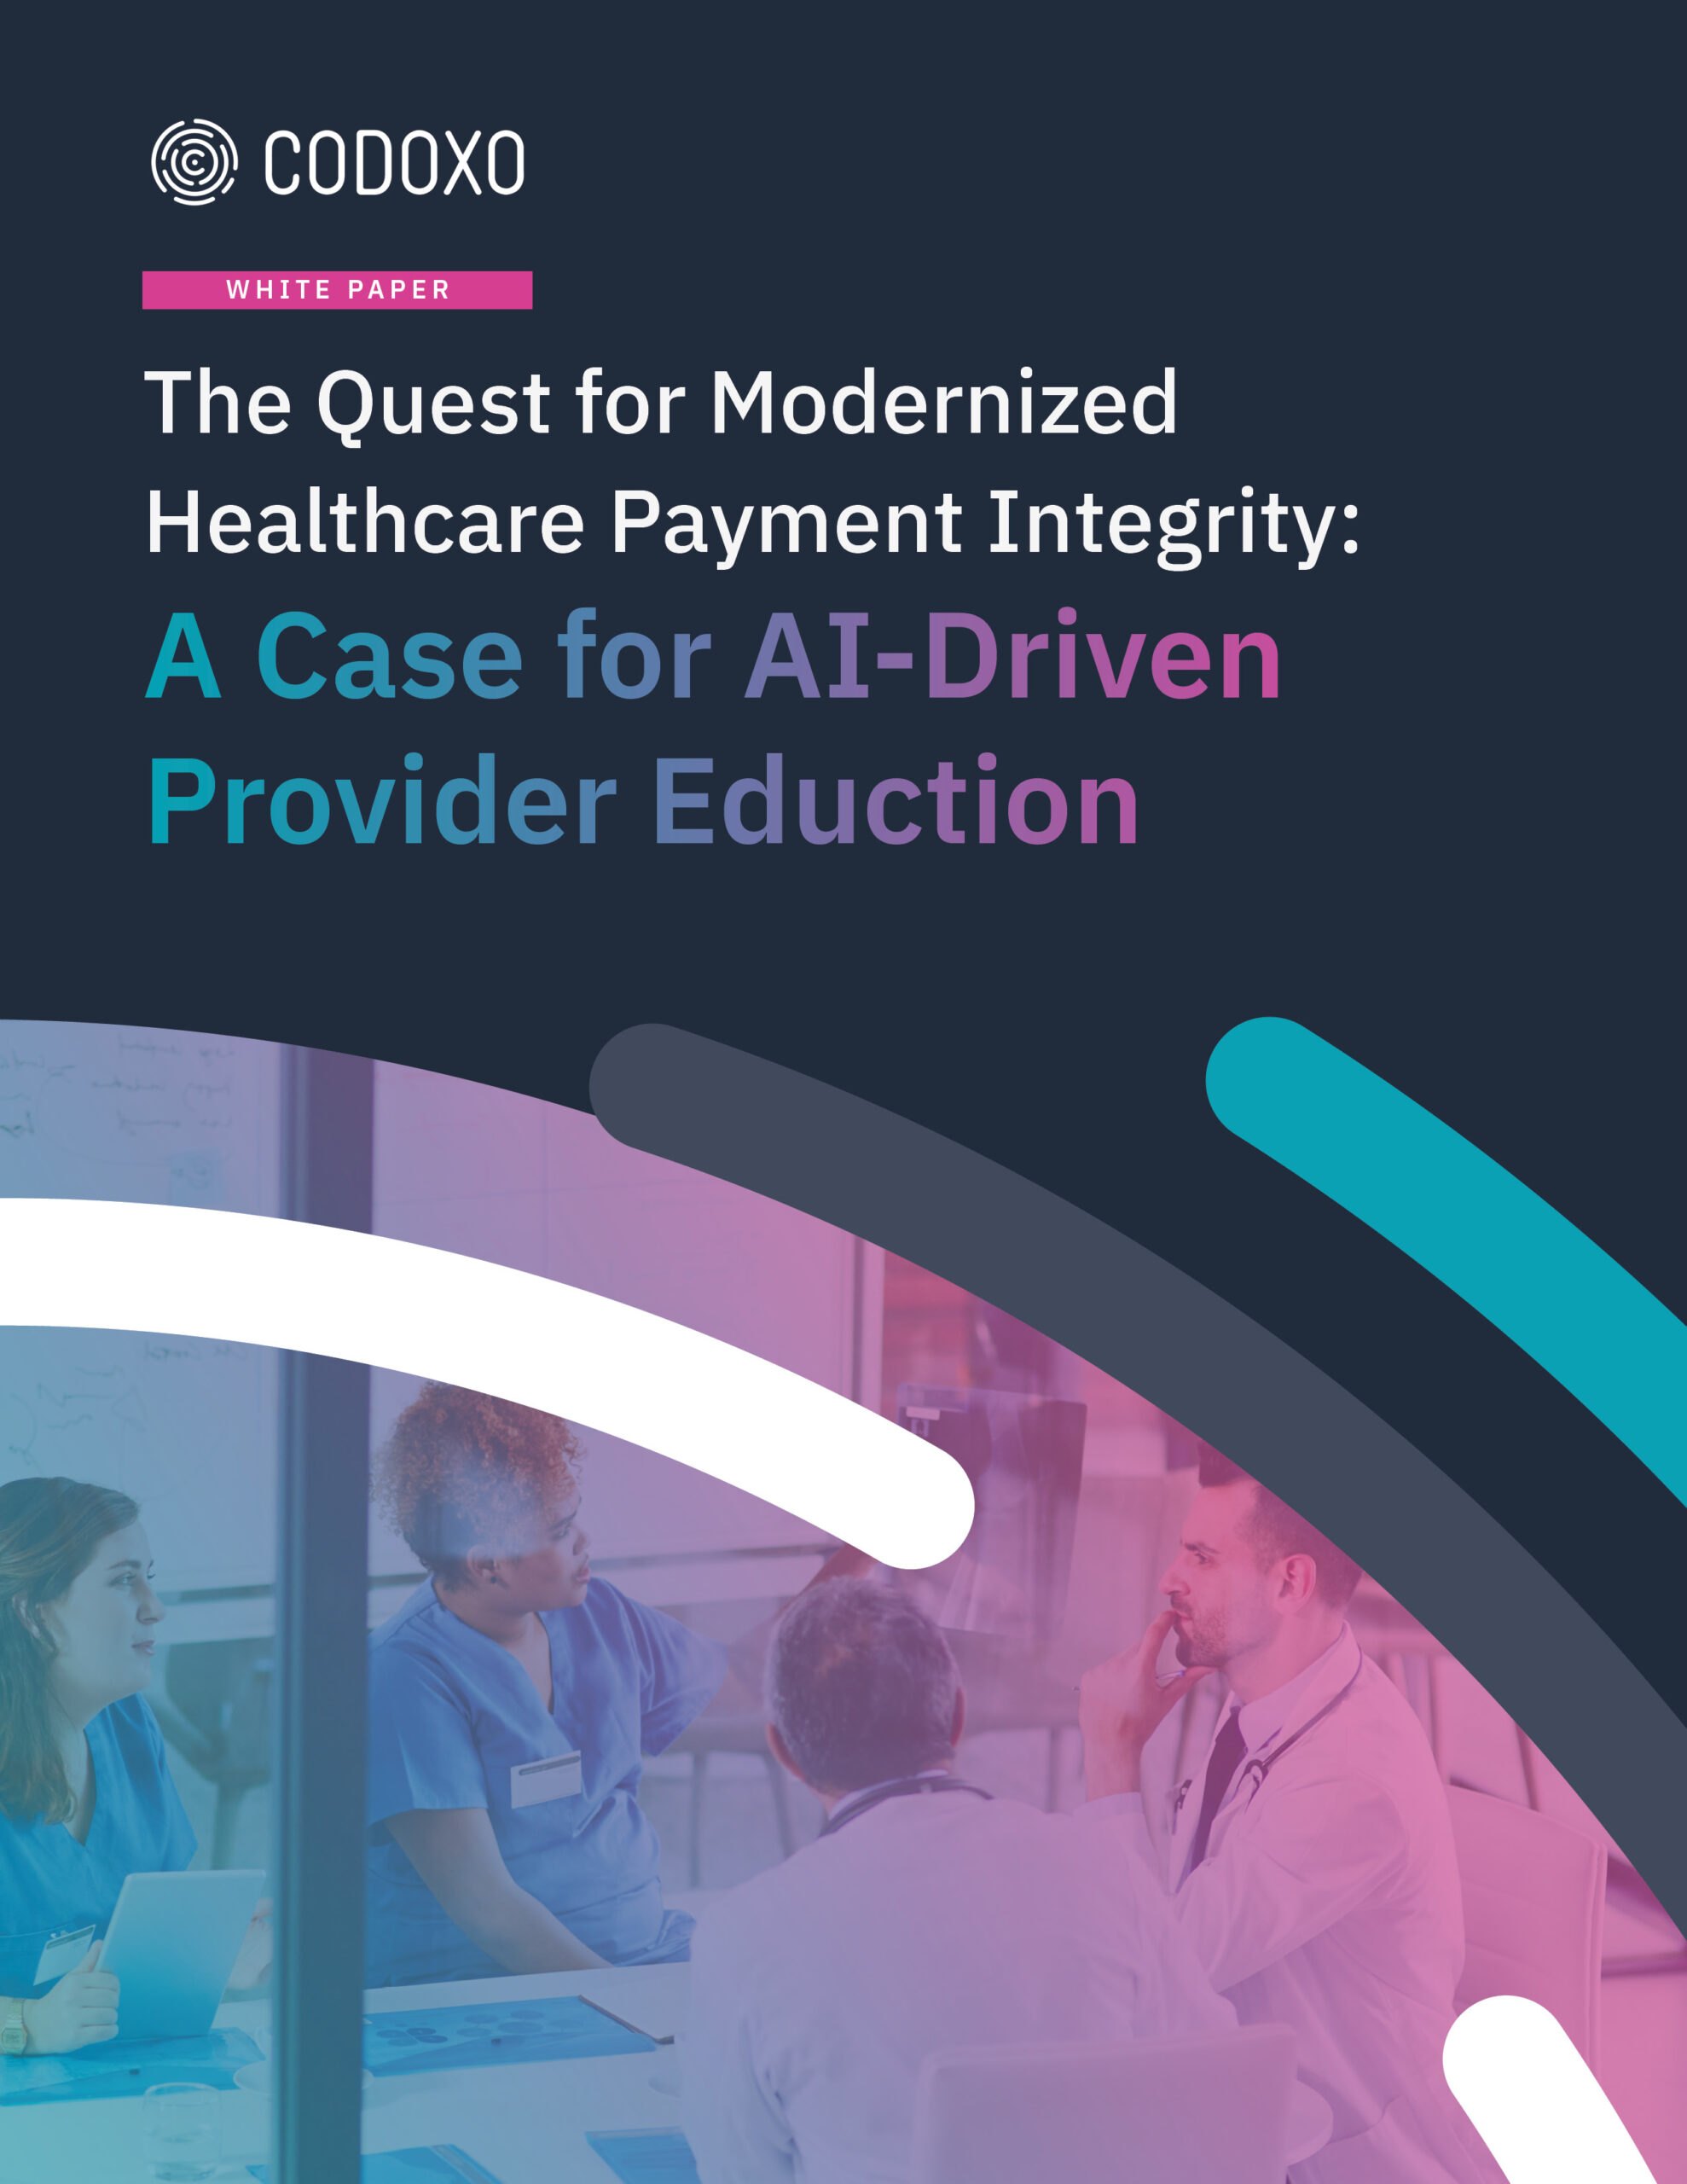 The Quest for Modernized Healthcare Payment Integrity: A Case for AI-Driven Provider Education  